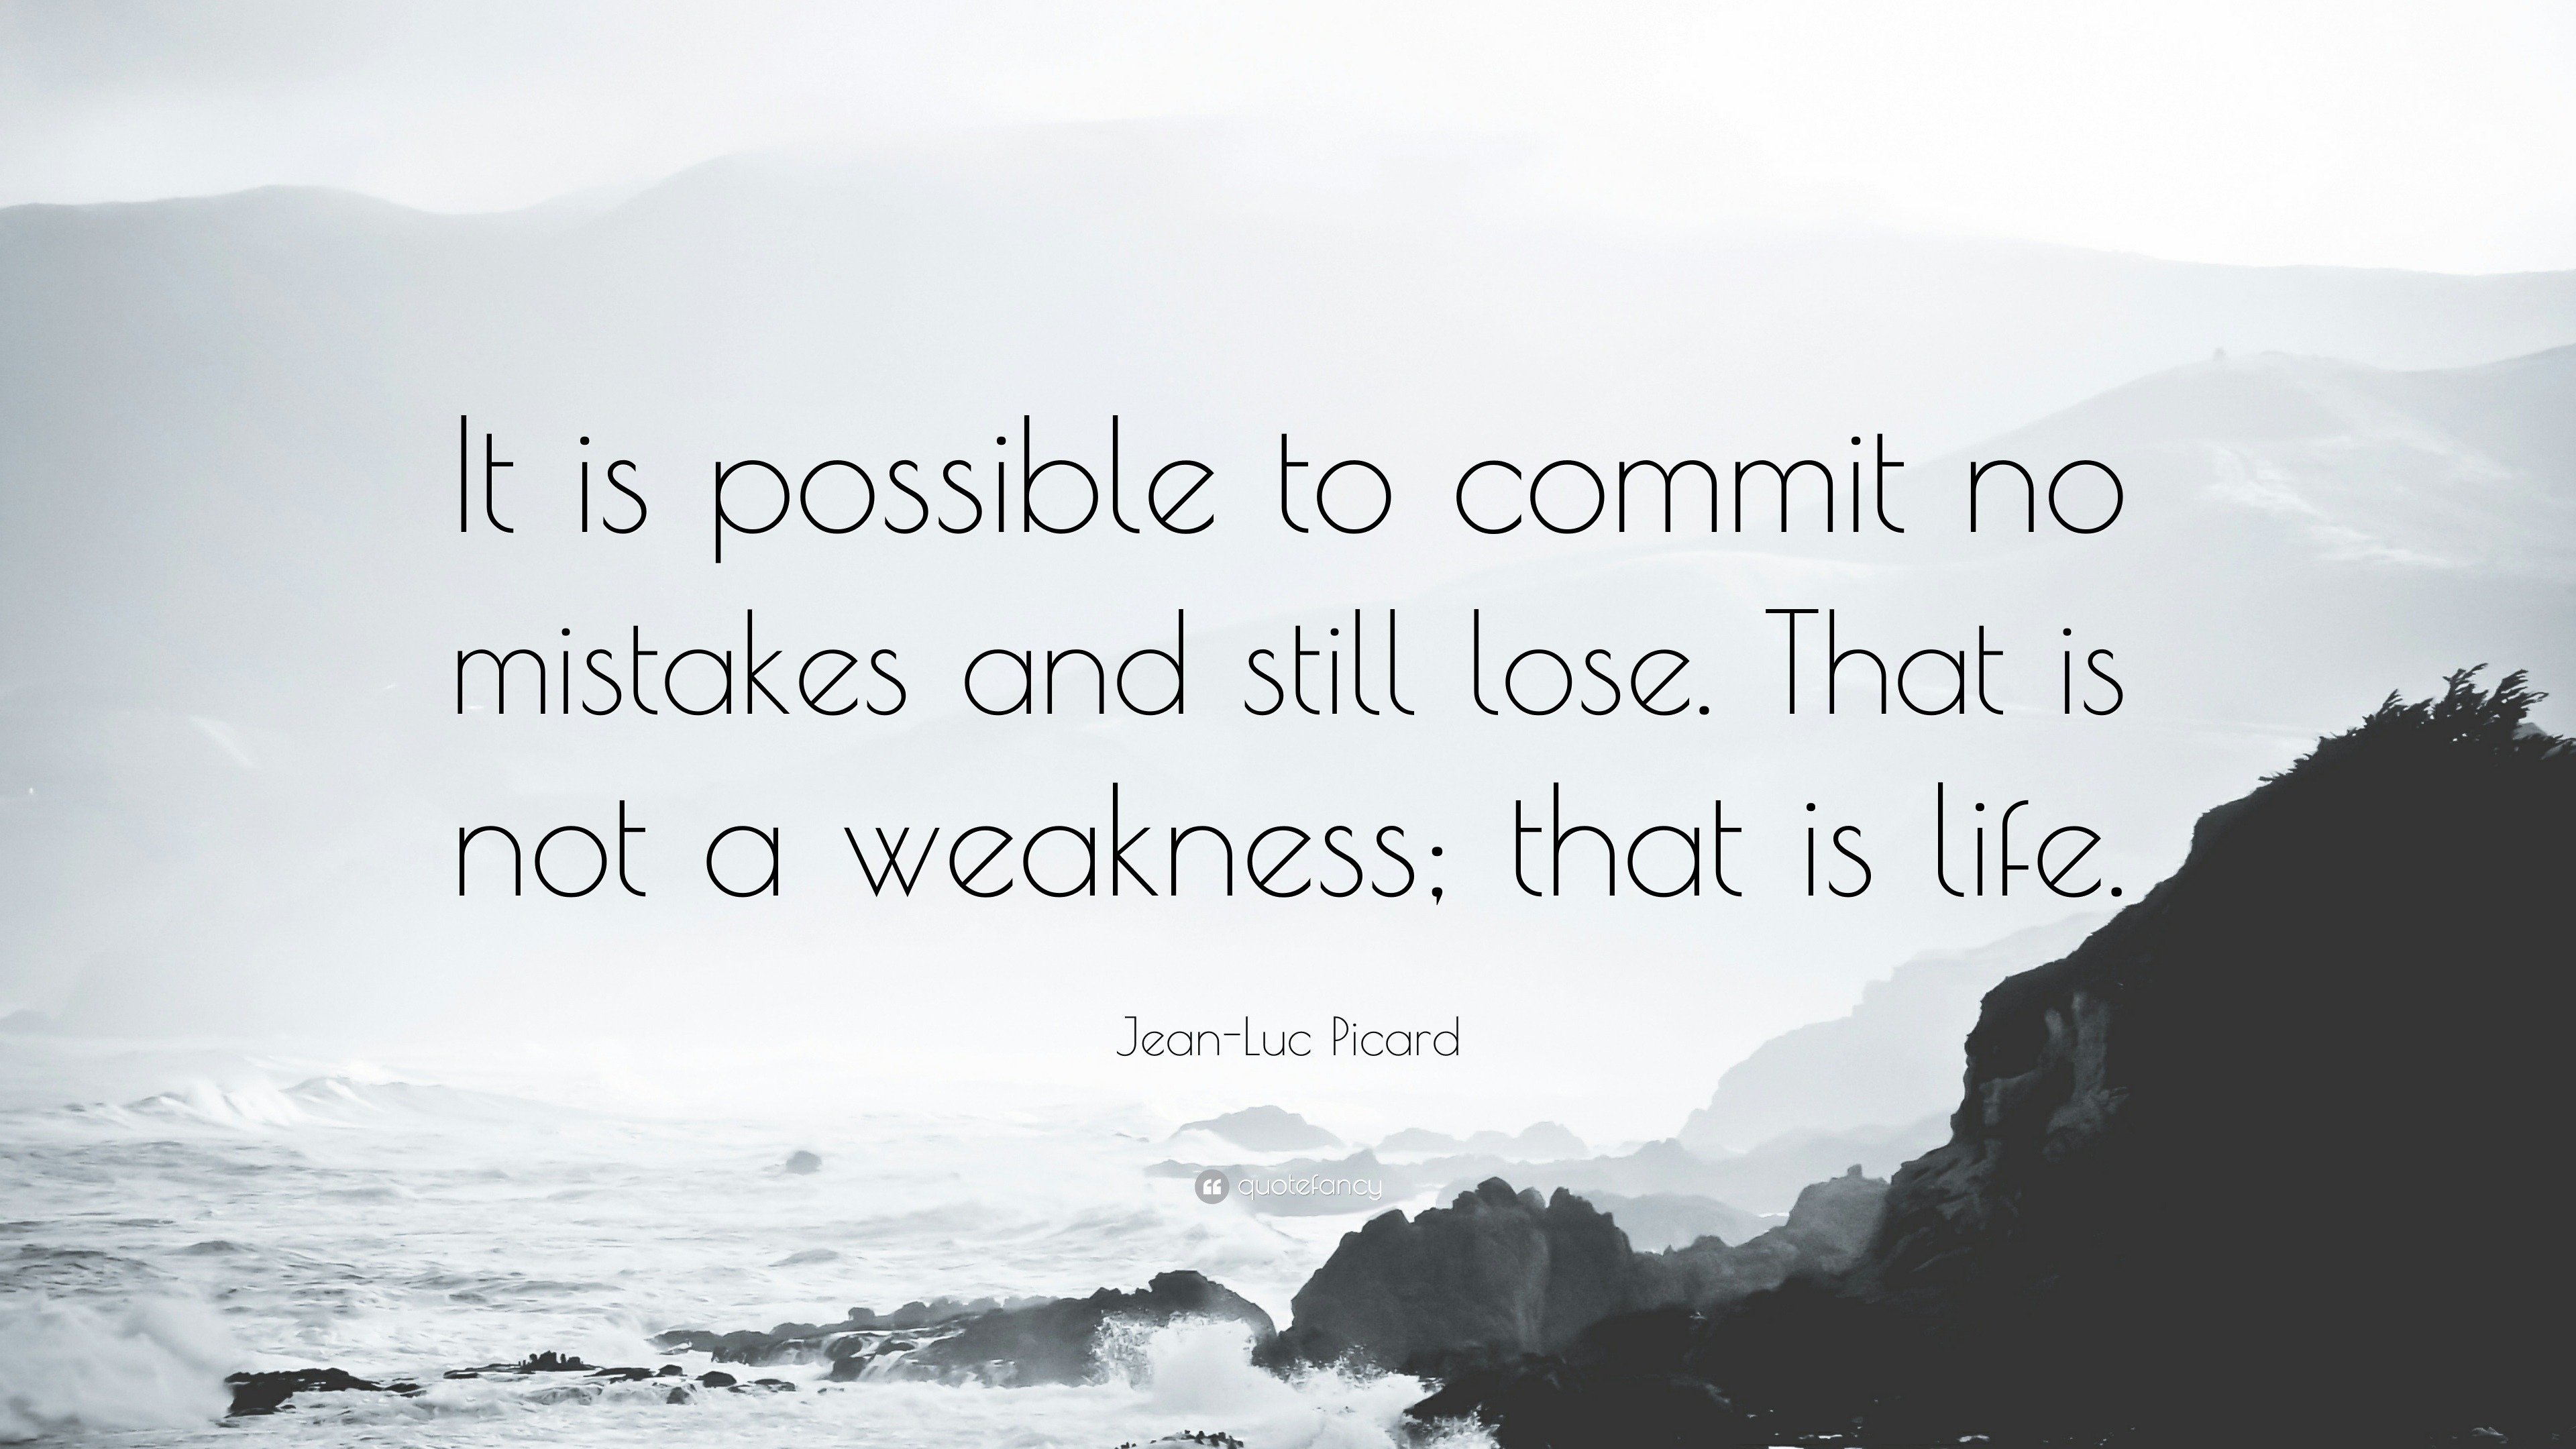 Jean-Luc Picard Quote: “It is possible to commit no mistakes and still